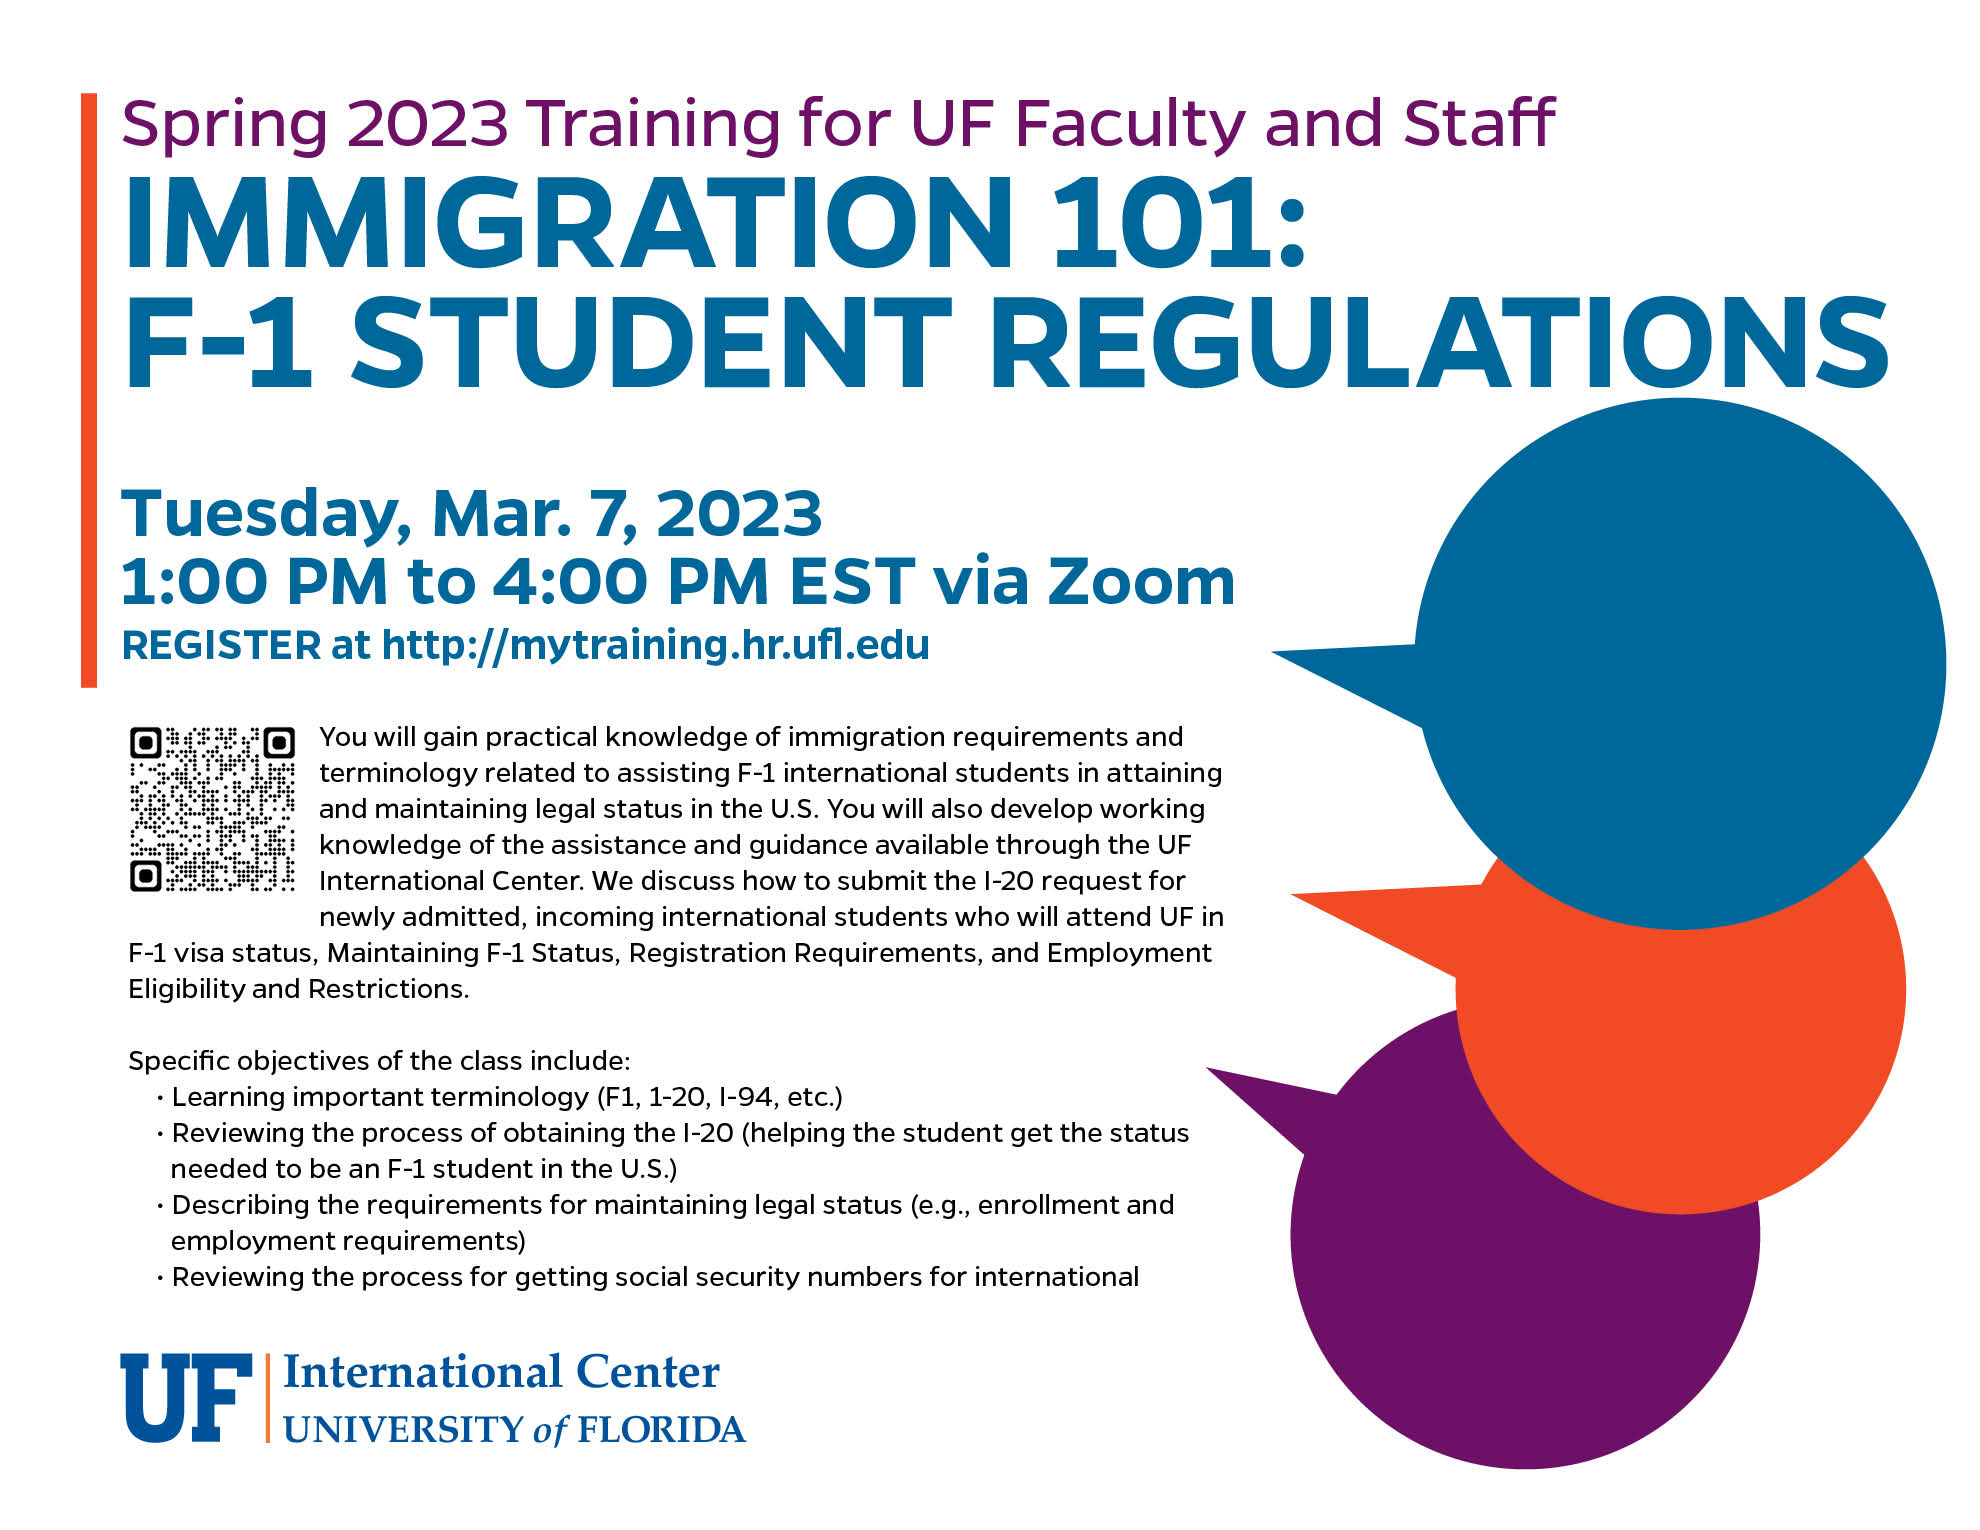 IMMIGRATION 101 F1 STUDENT REGULATIONS (FOR UF FACULTY AND STAFF ONLY